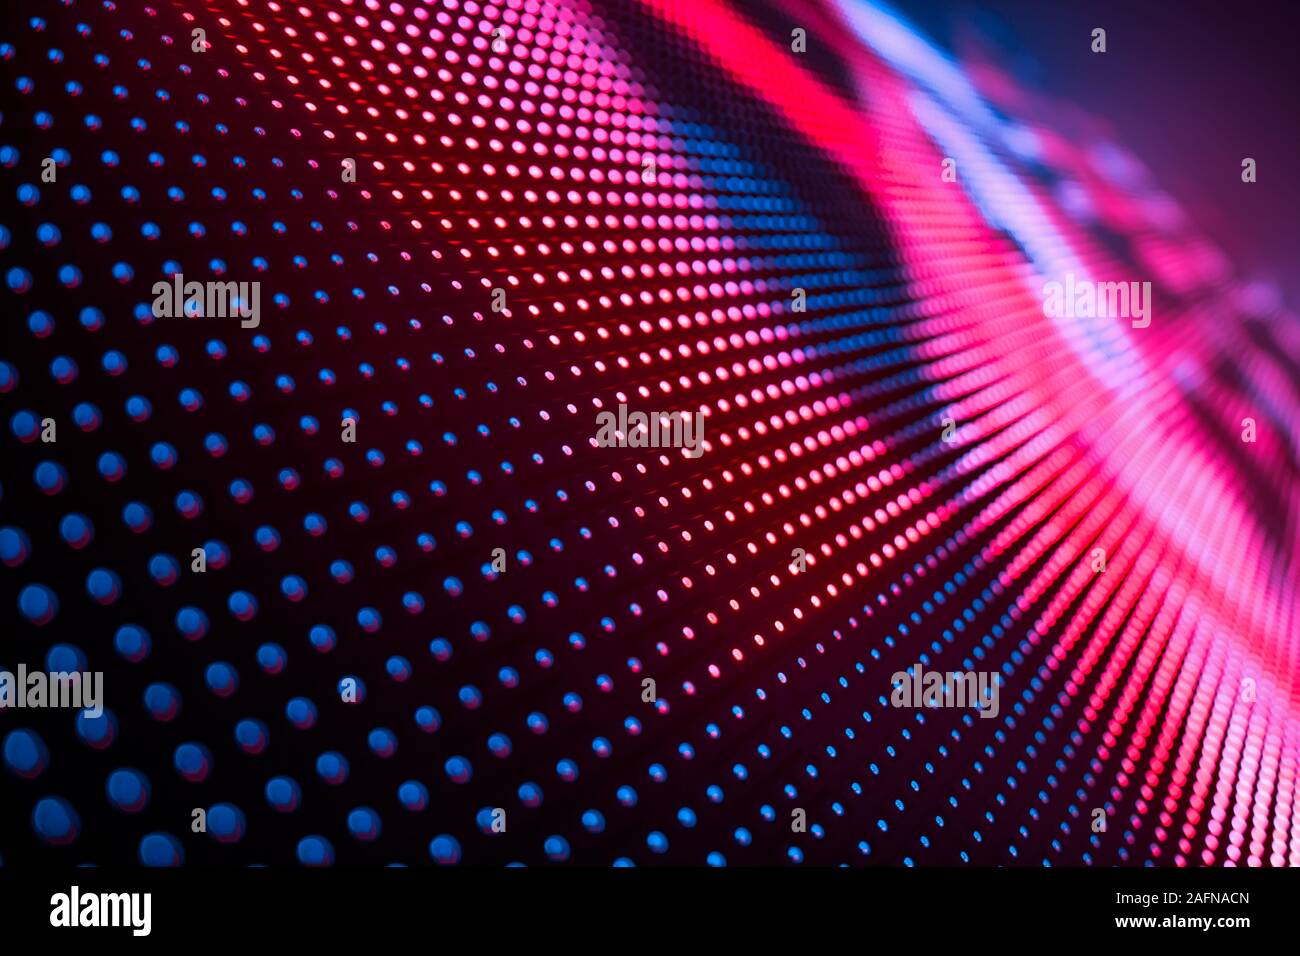 Abstract Led wall background with soft focus. Stock Photo